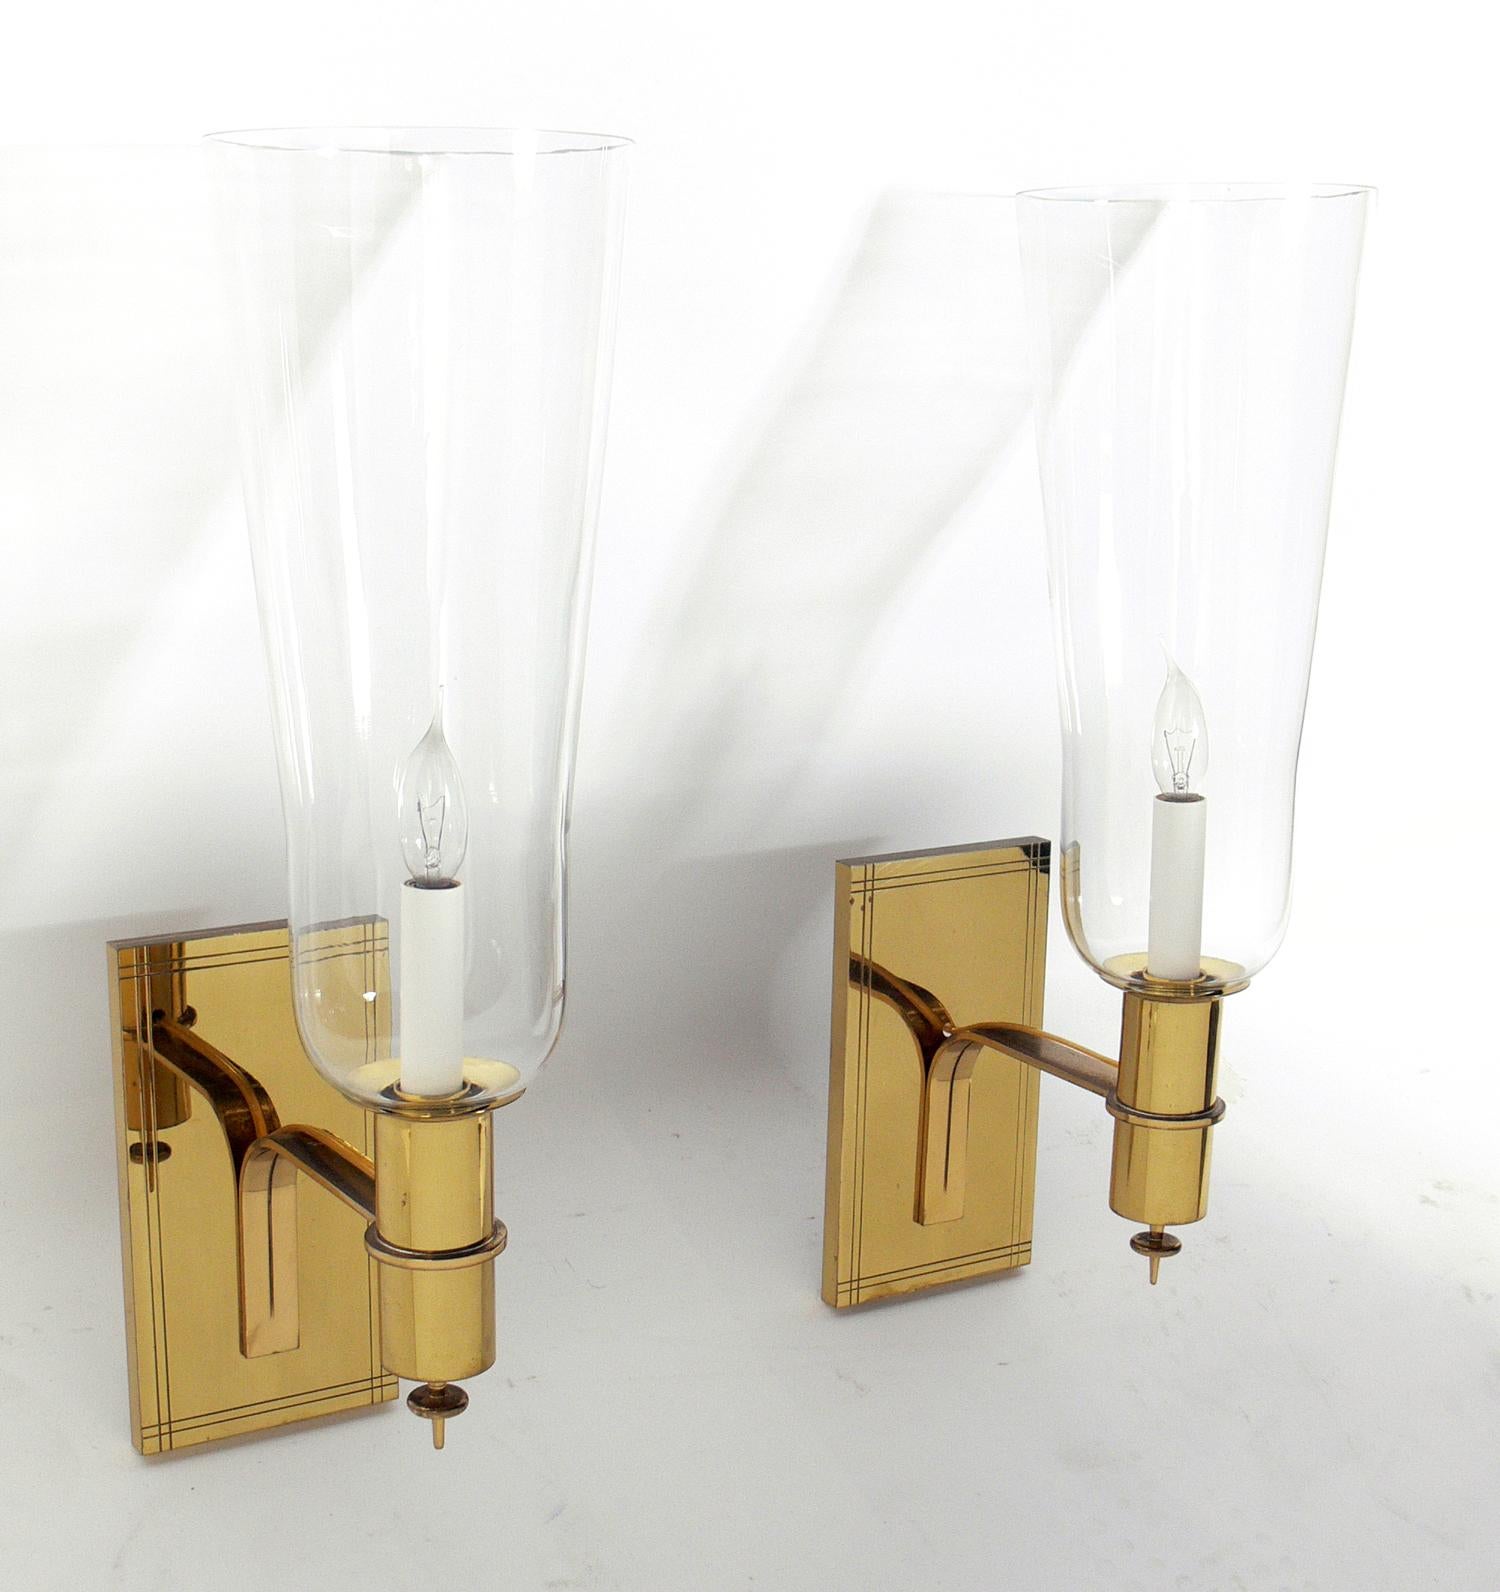 Pair of brass and glass sconces, designed by Tommi Parzinger, American, circa 1950s. They have been rewired and are ready to use.